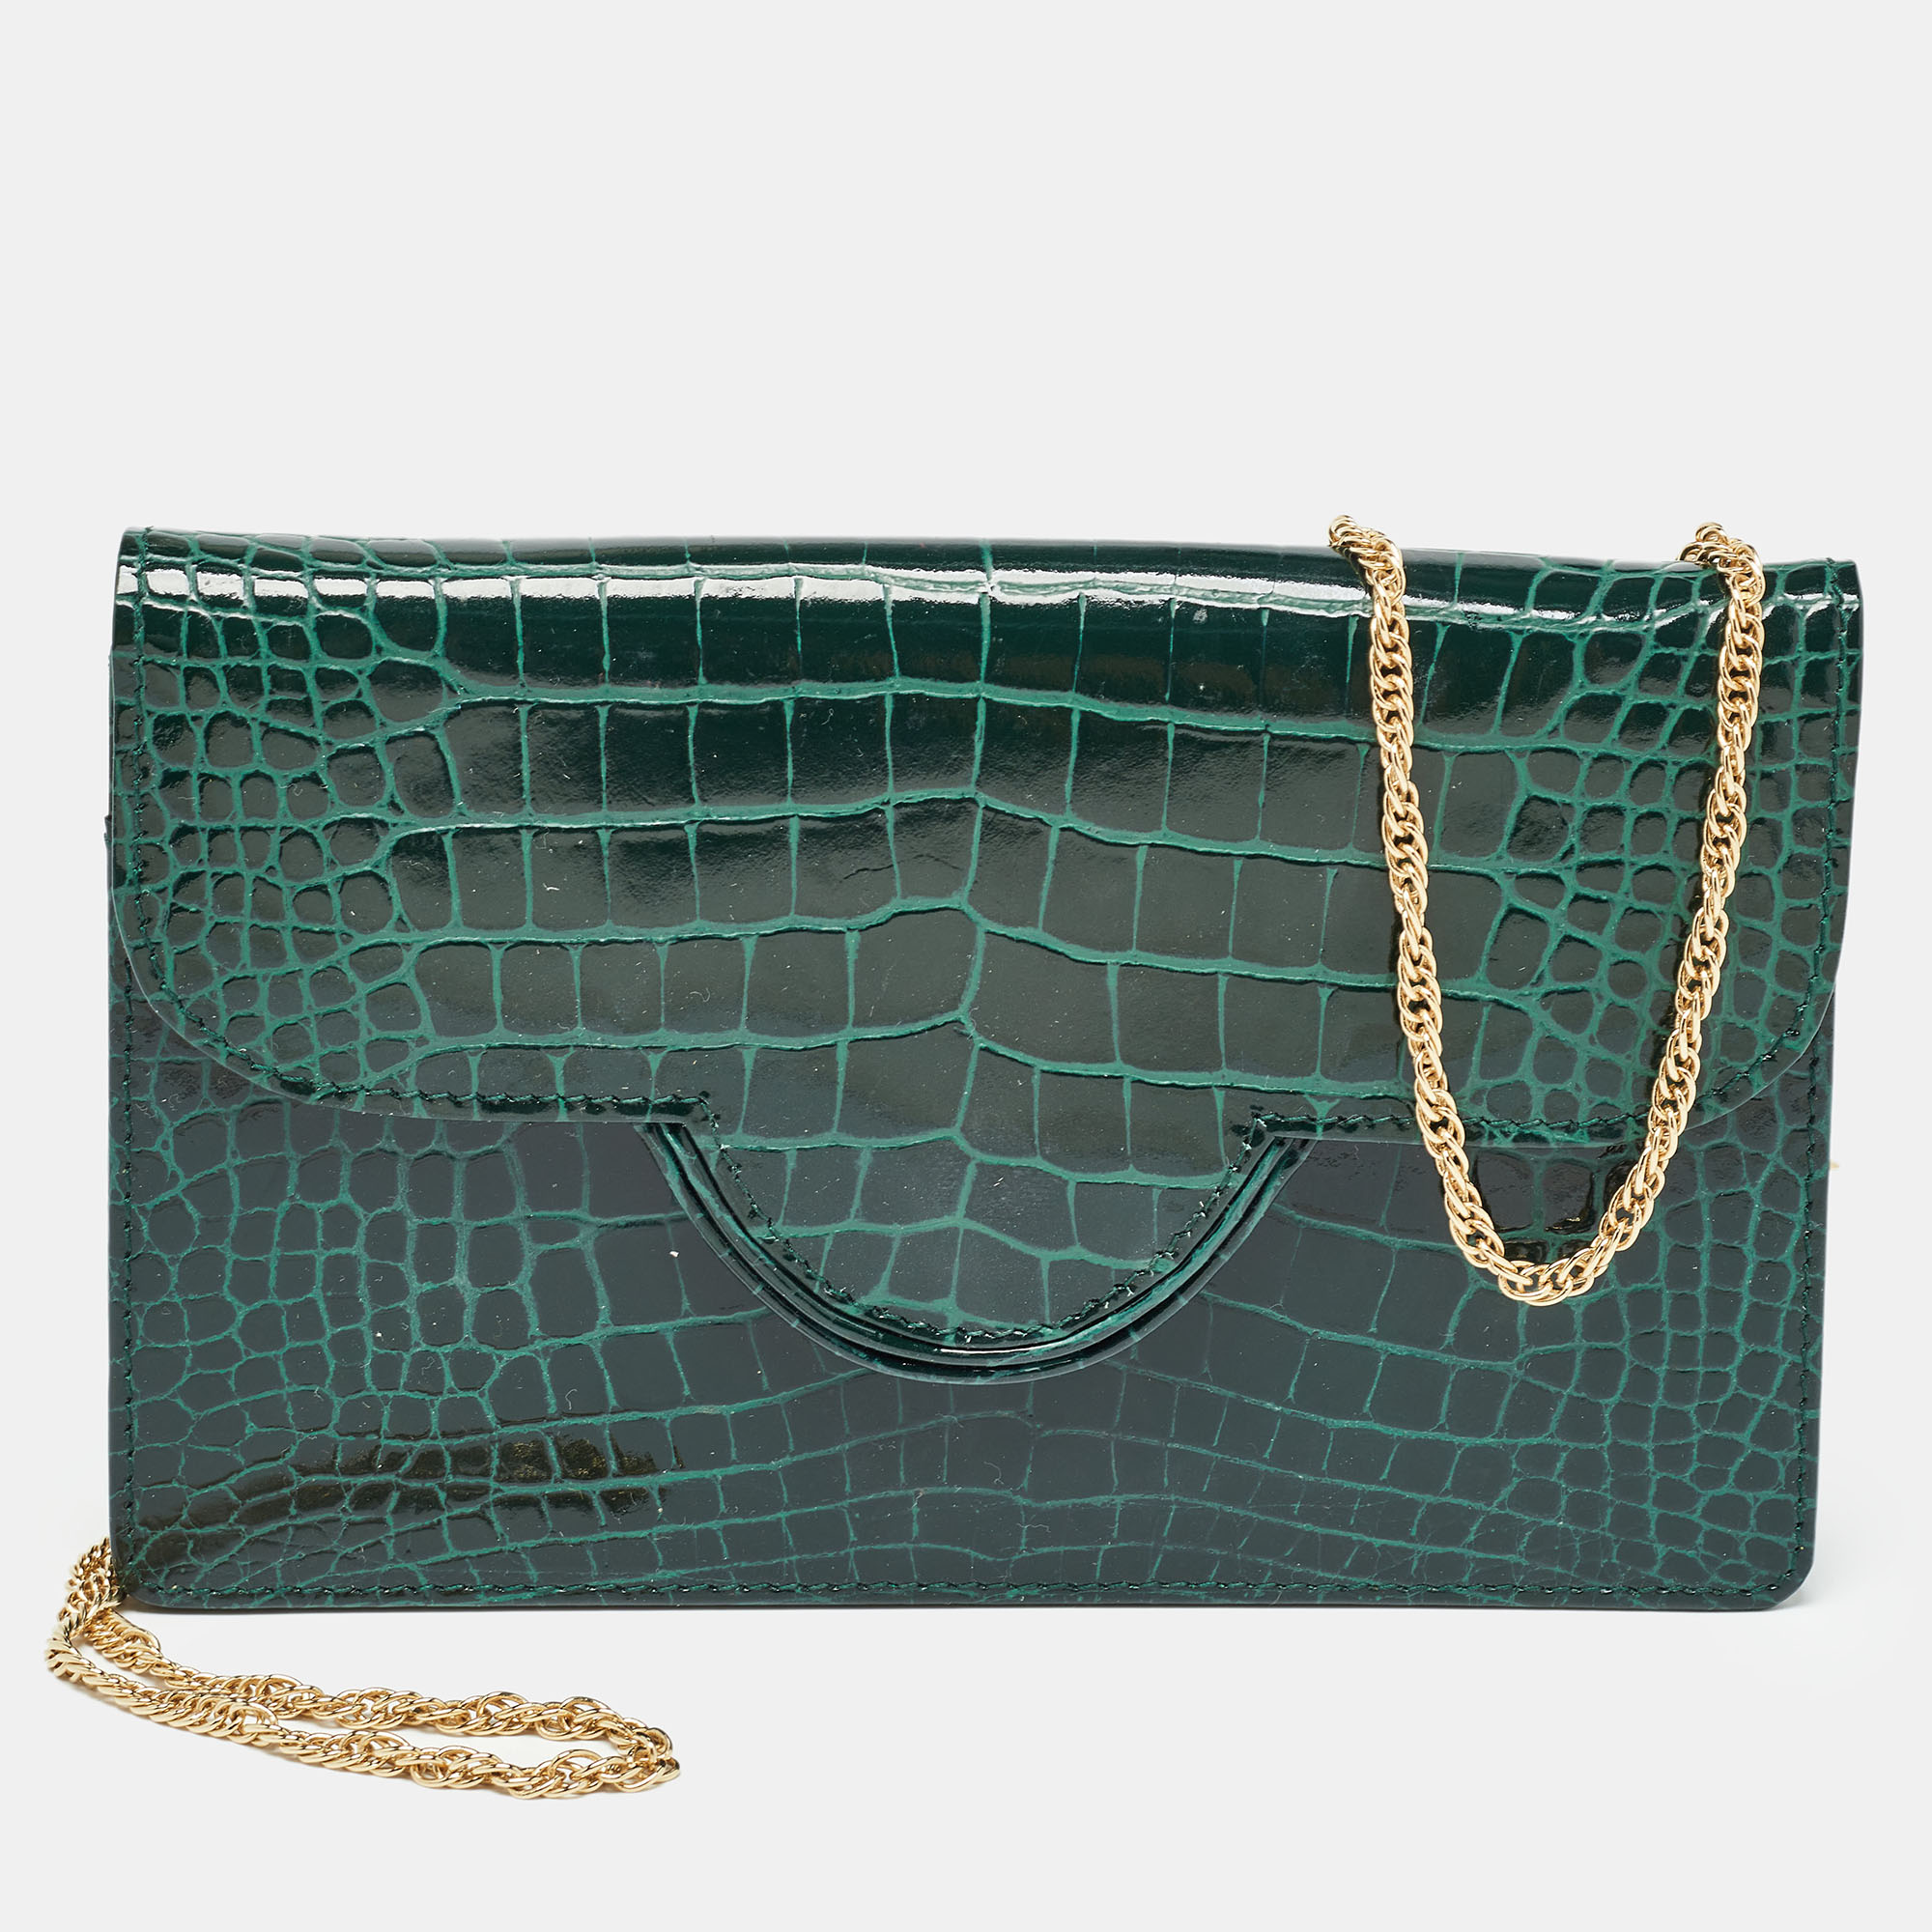 Aspinal of london green croc embossed leather large ava chain bag